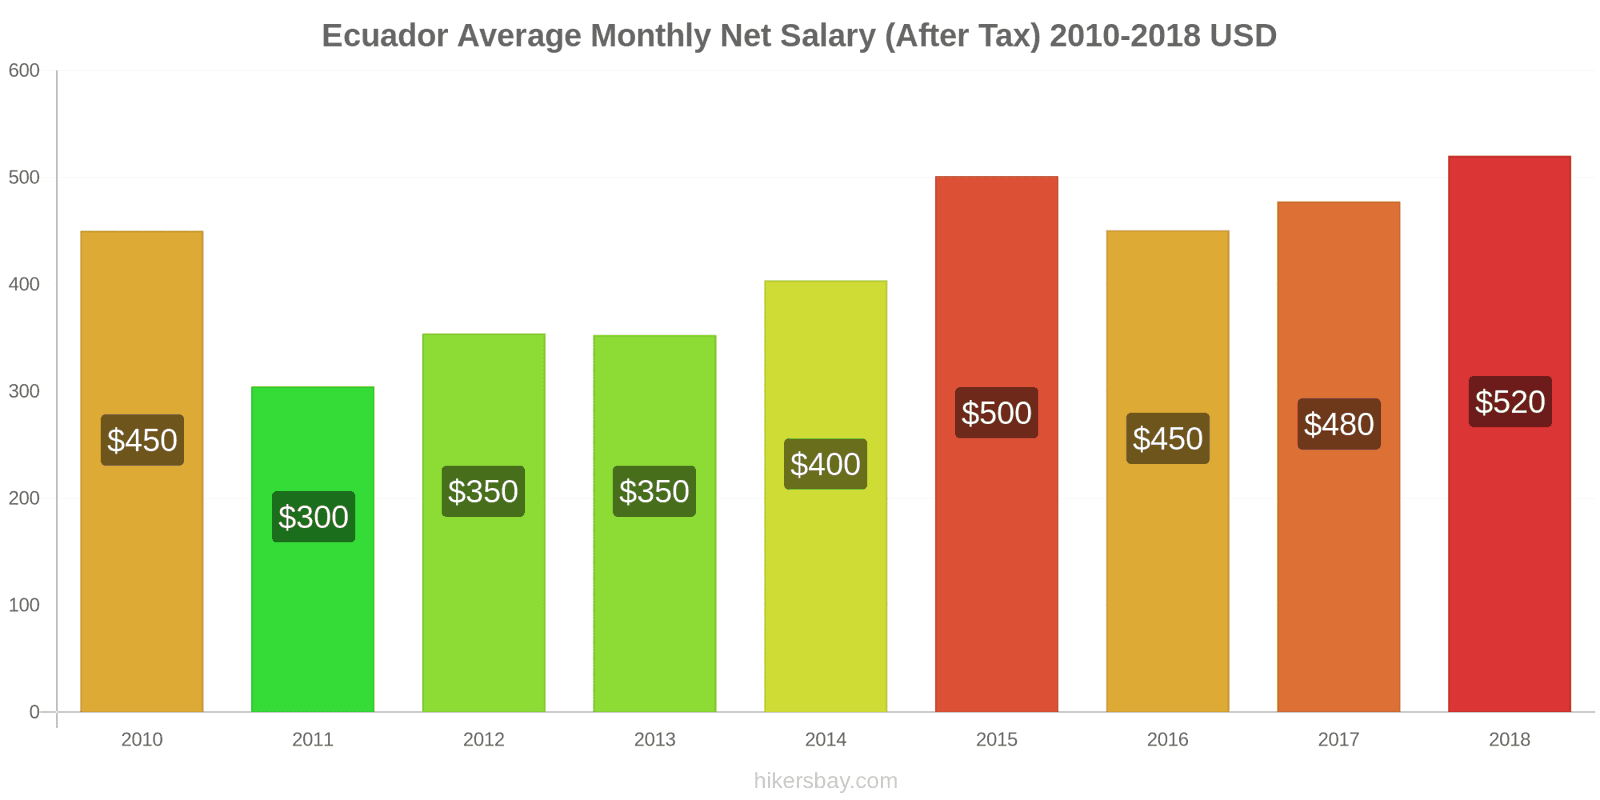 Ecuador price changes Average Monthly Net Salary (After Tax) hikersbay.com